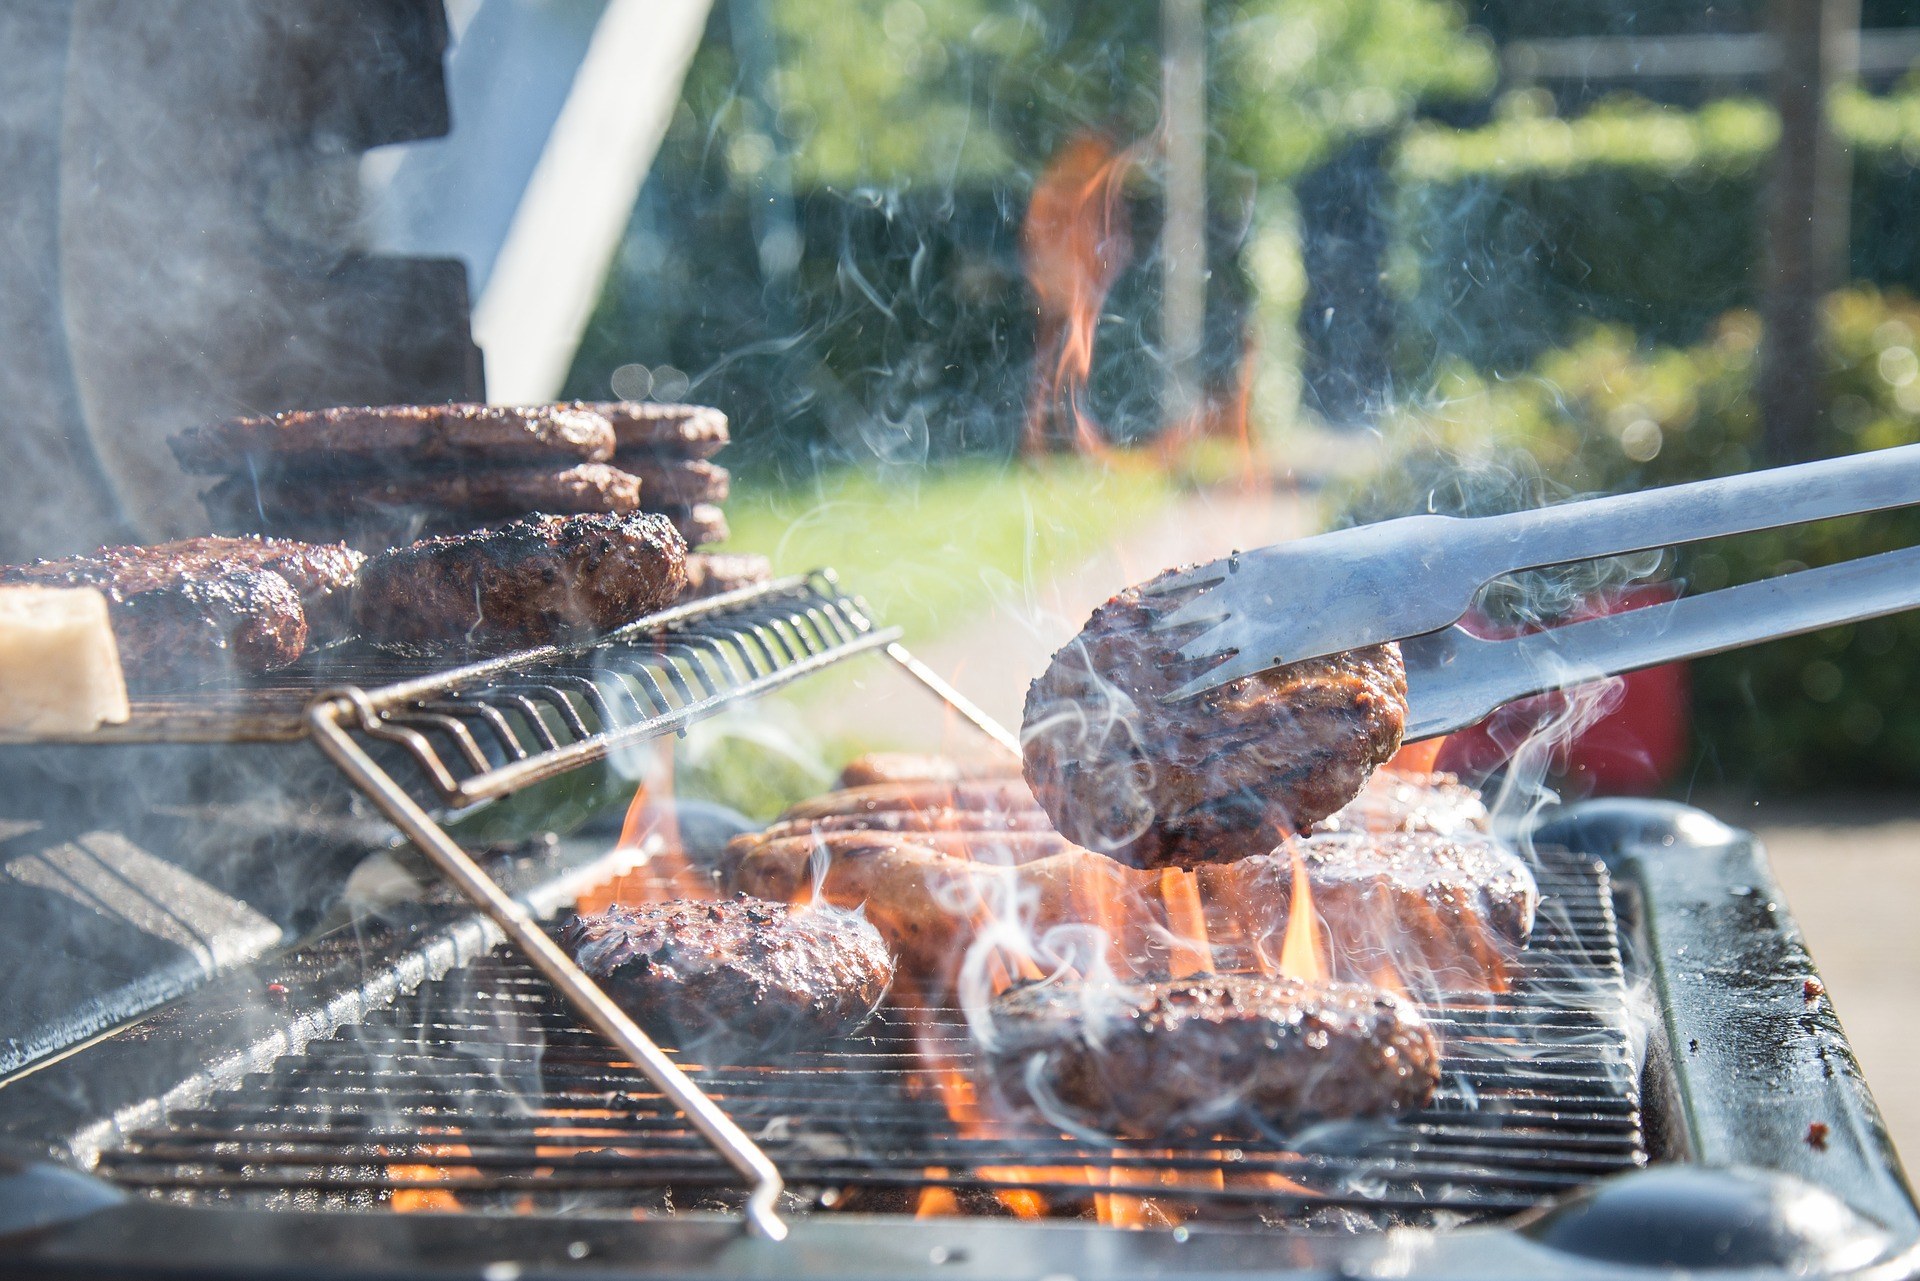 Image of food on a barbecue